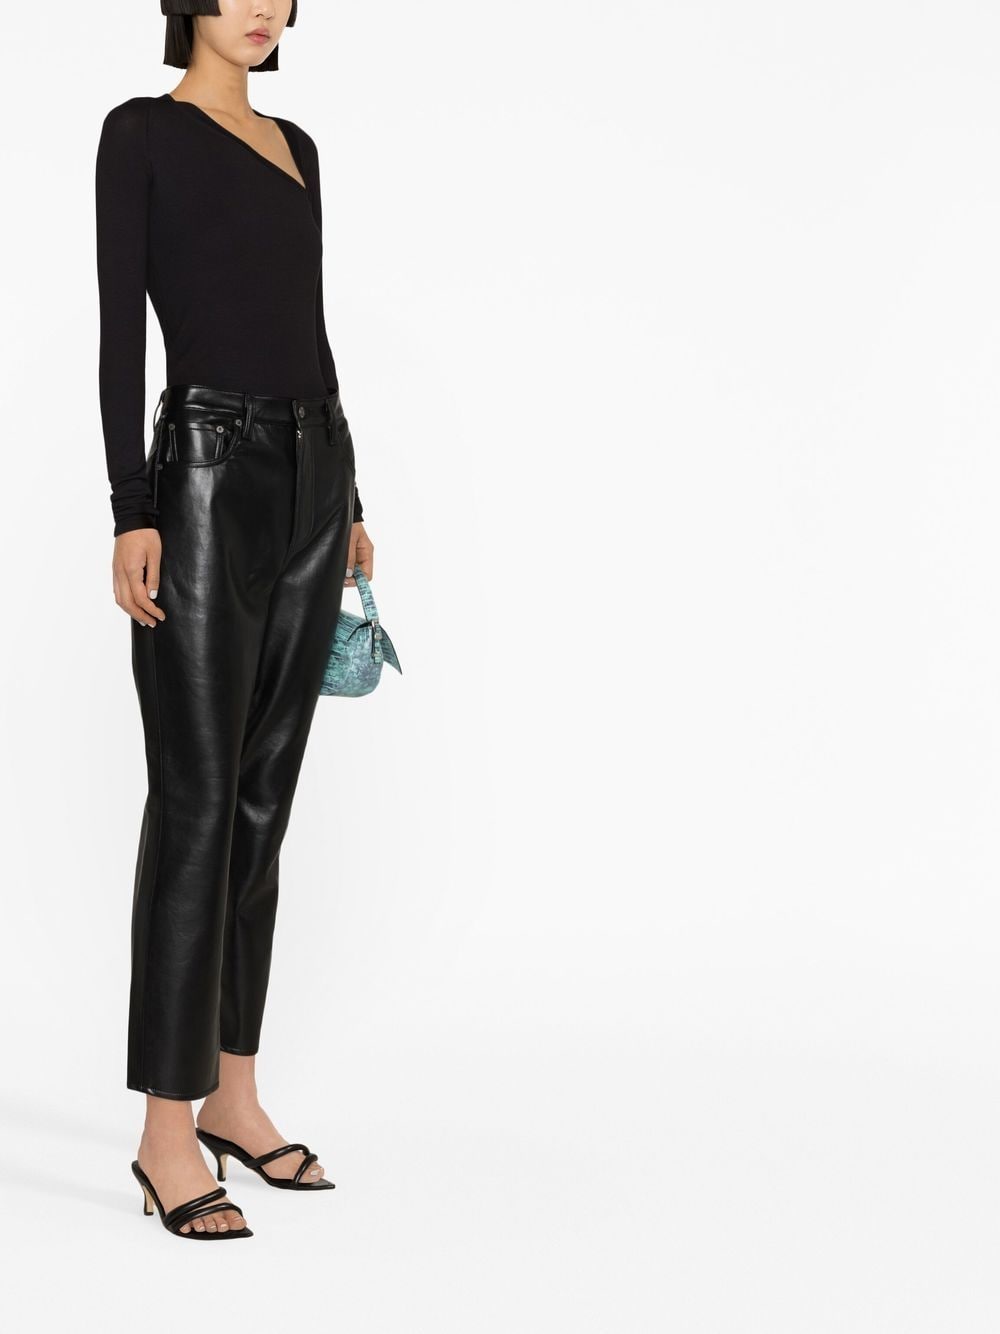 ALIX NYC  THE OUTNET